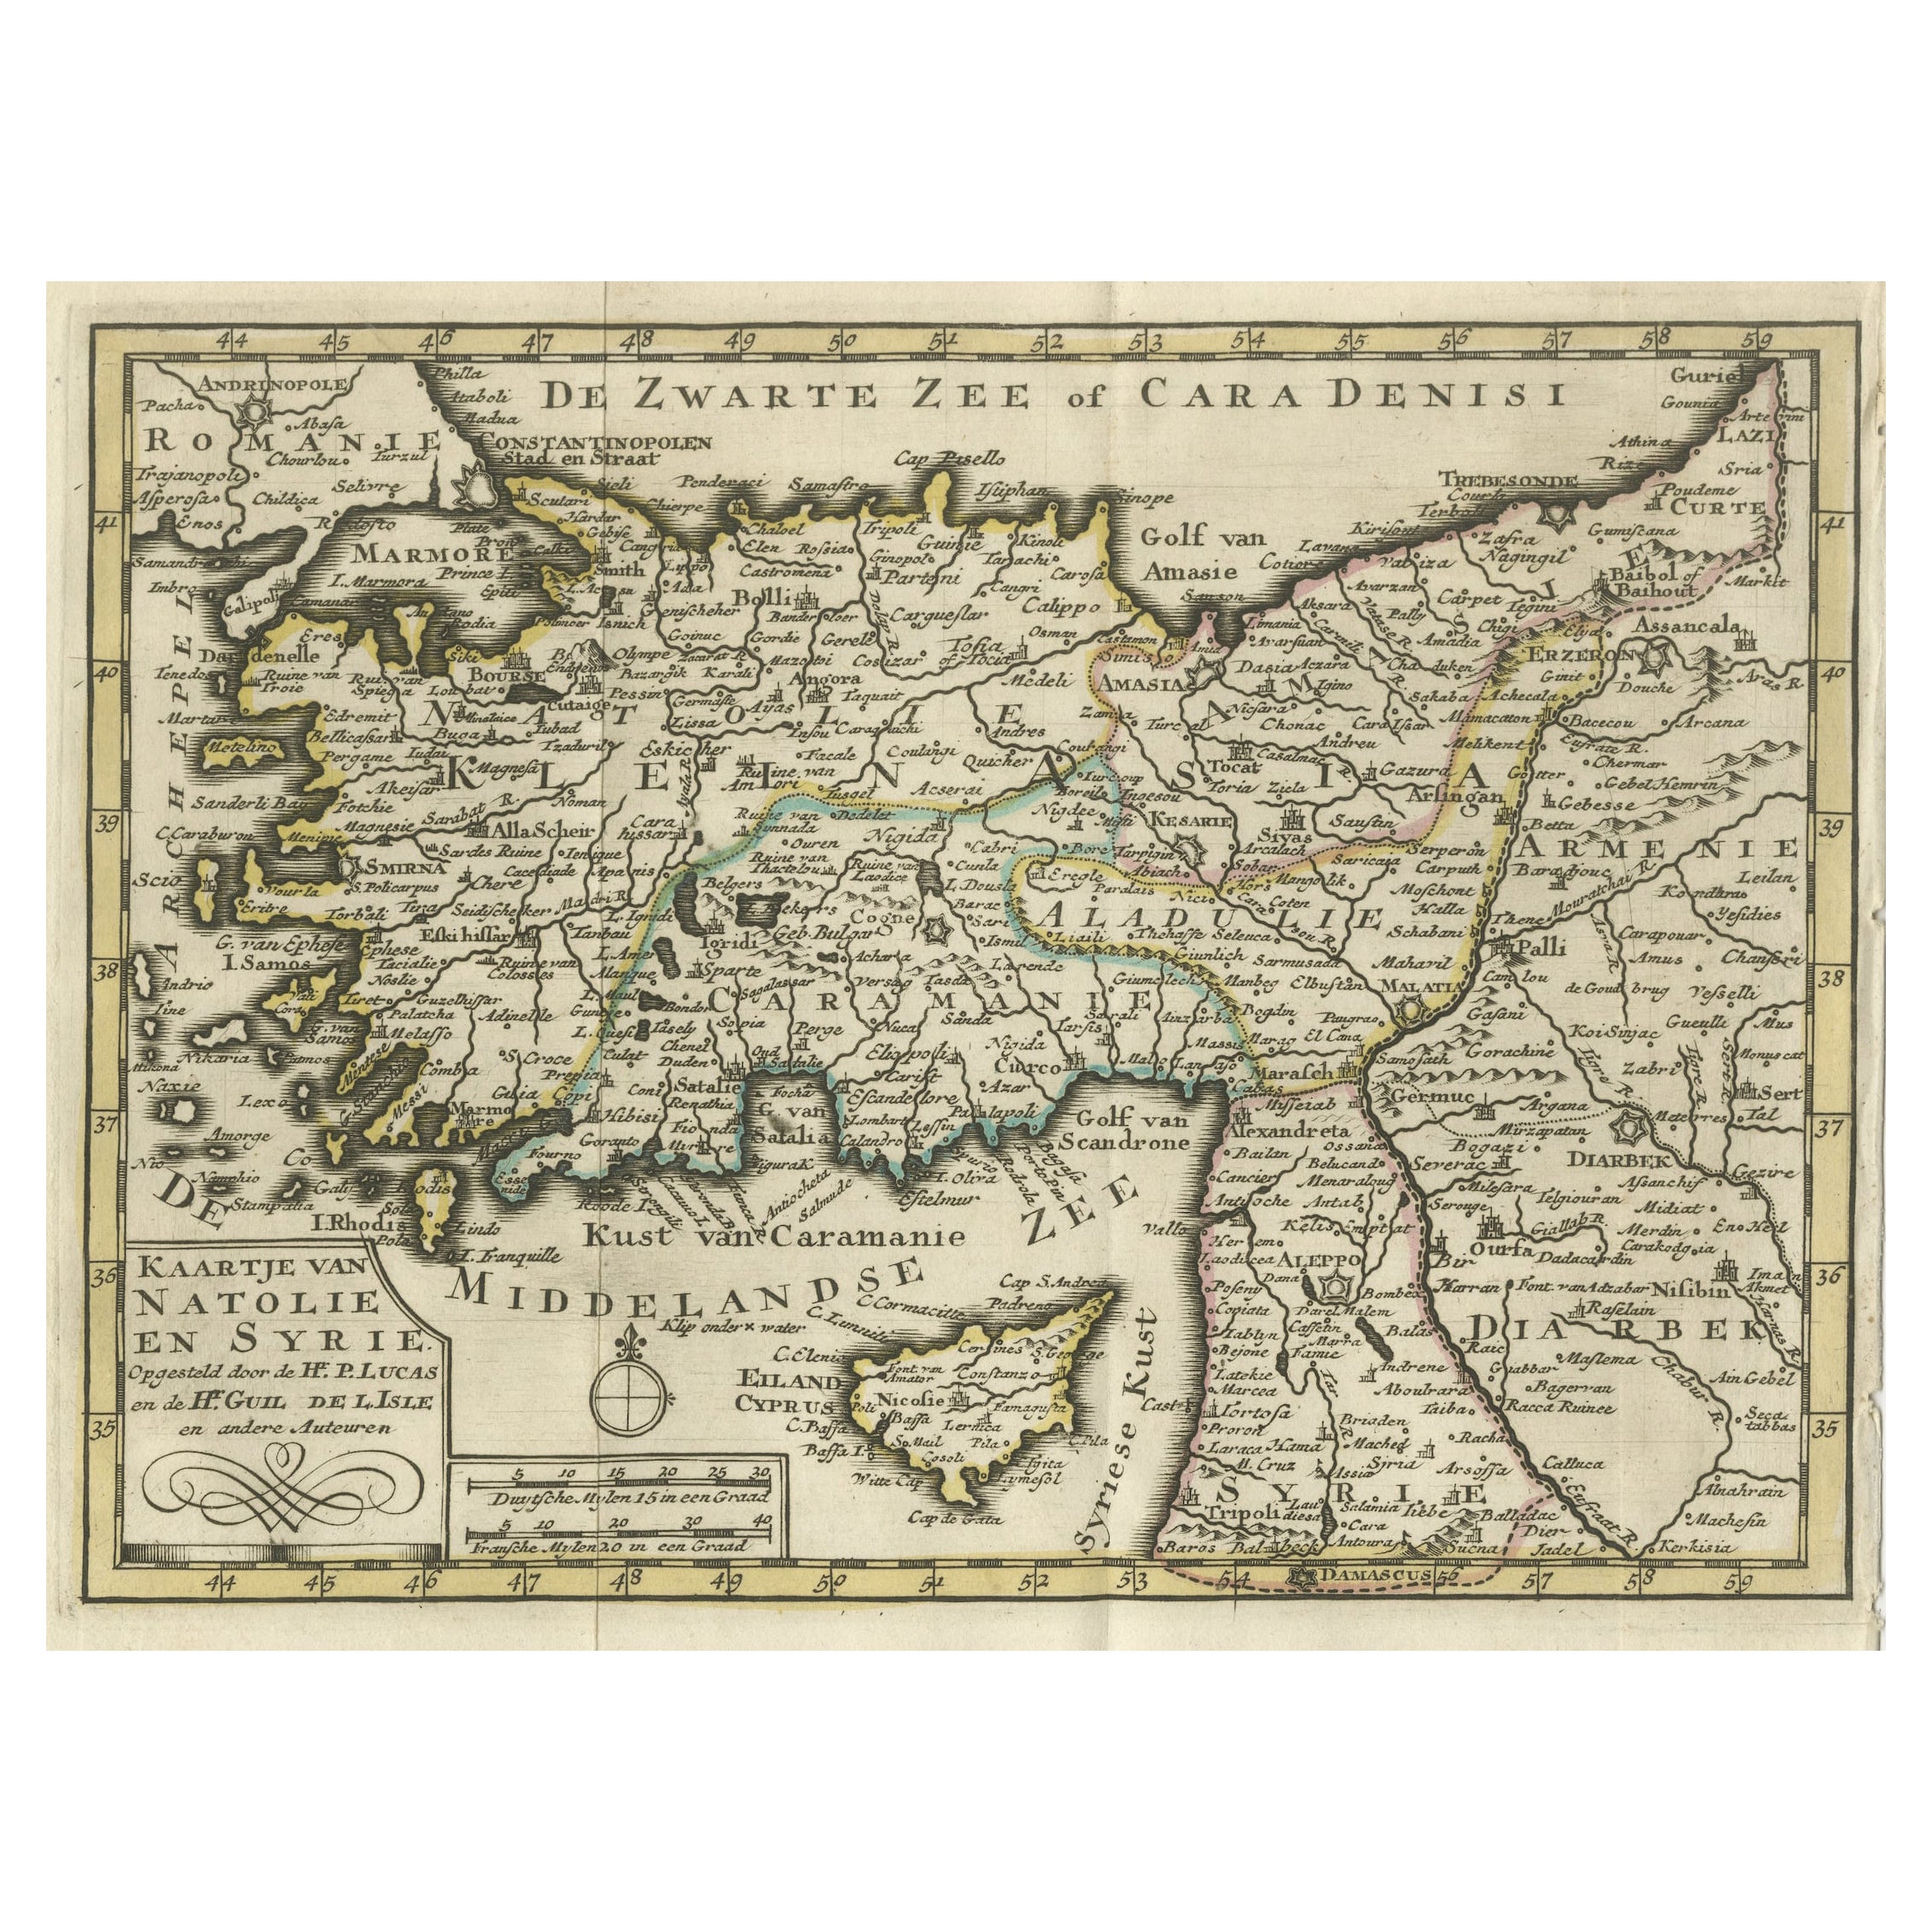 Old Map of Anatolia, part of modern-day Turkey, Armenia and Syria, 1745